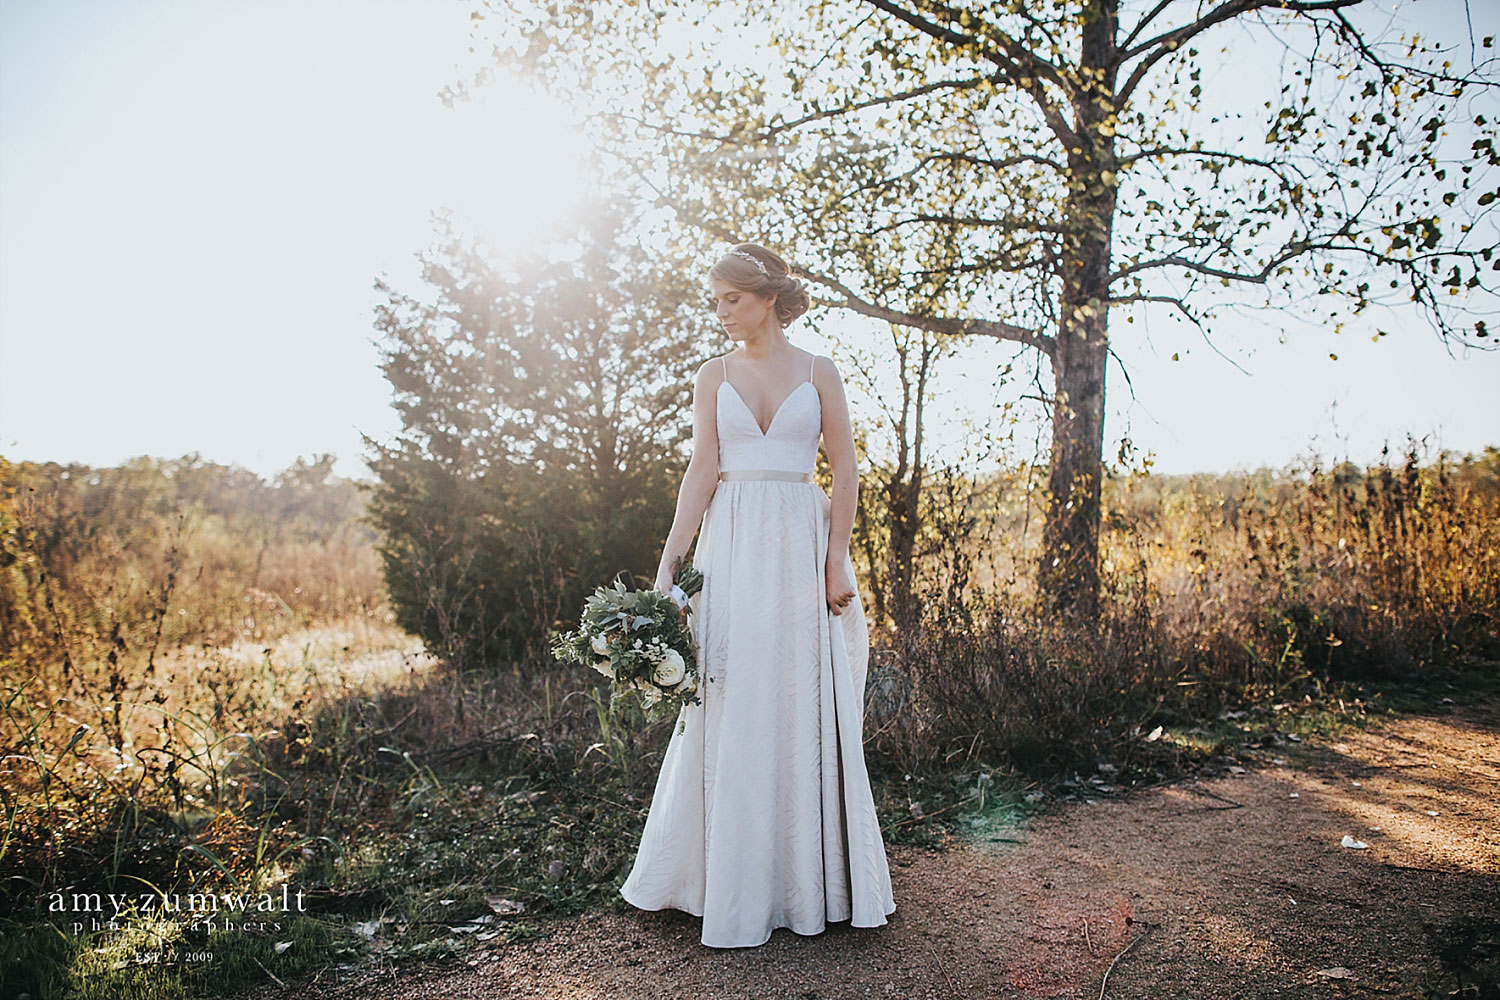 Bride holding a greenery bouquet in woodland scenery